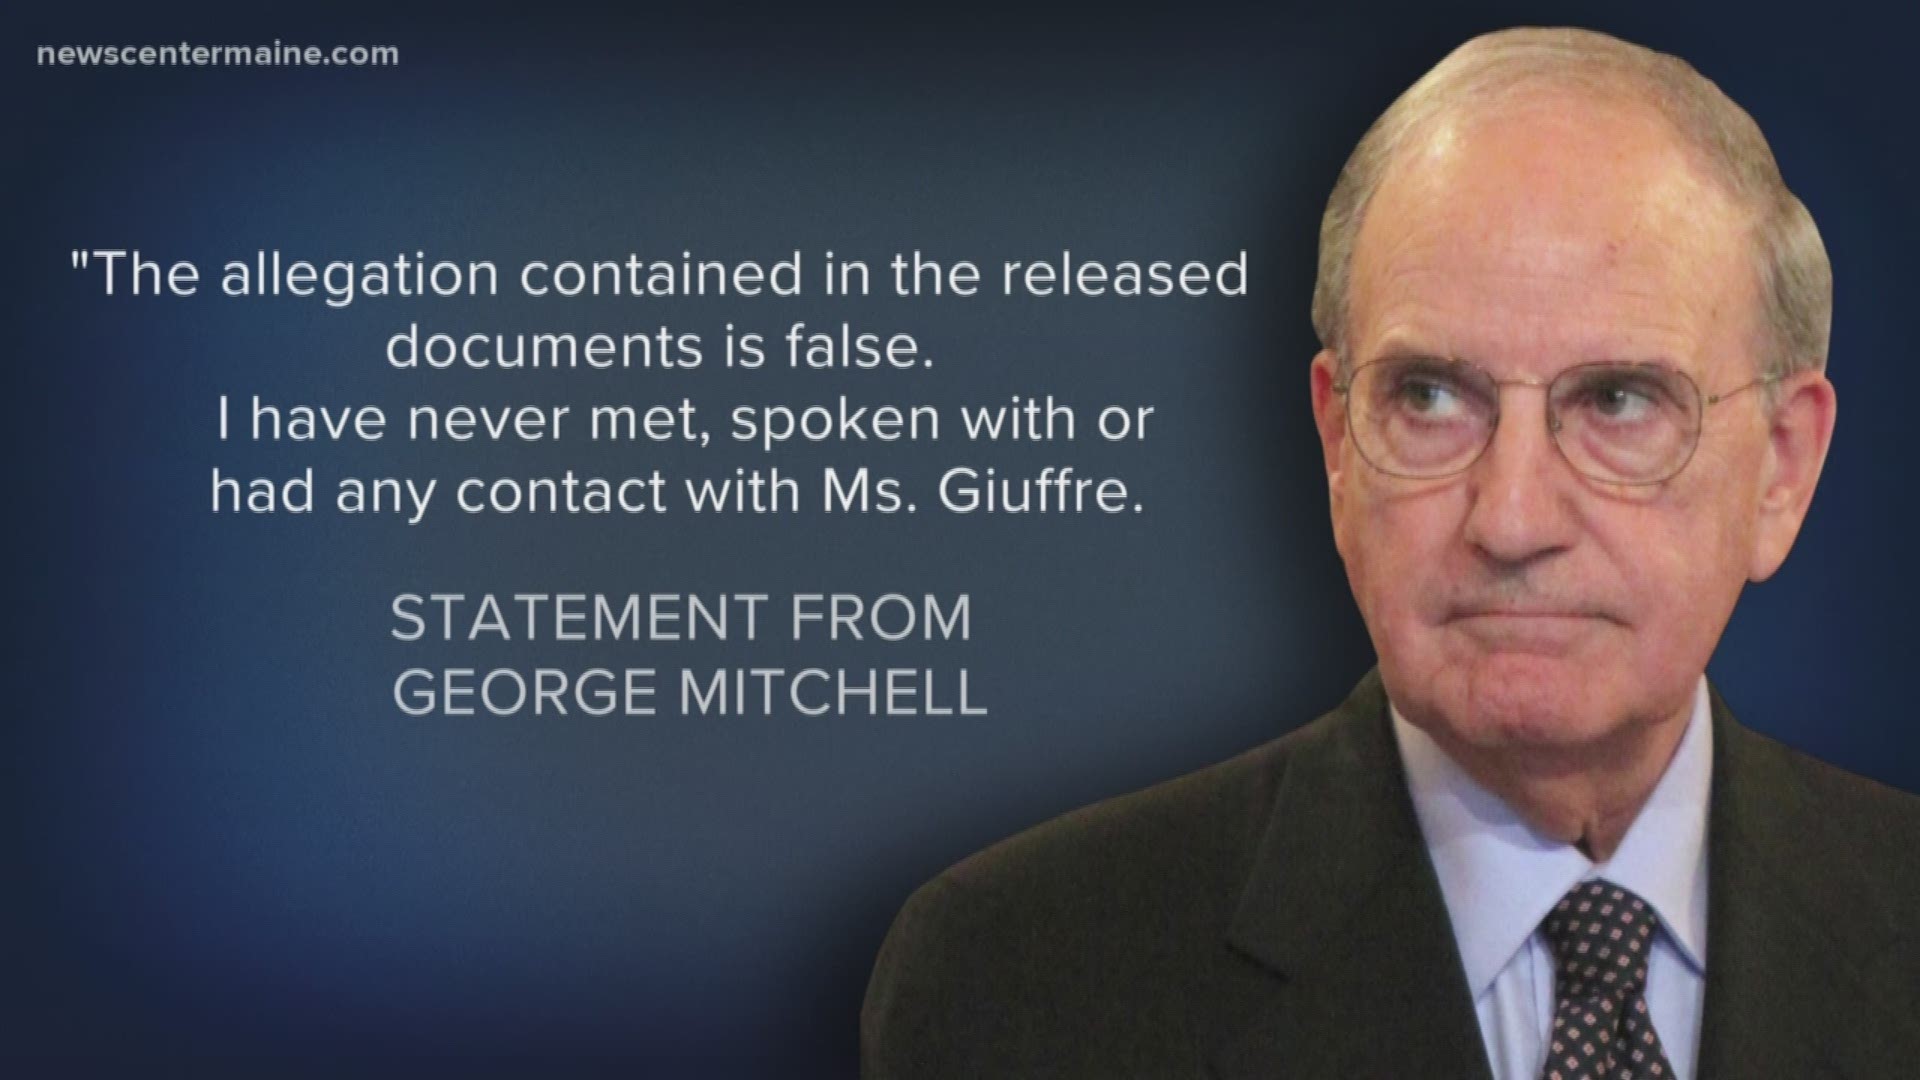 Former Maine U.S. Sen. George Mitchell is among several prominent people named by Jeffrey Epstein's alleged sex trafficking victim, Virginia Giuffre, according to multiple reports citing court documents released Friday.